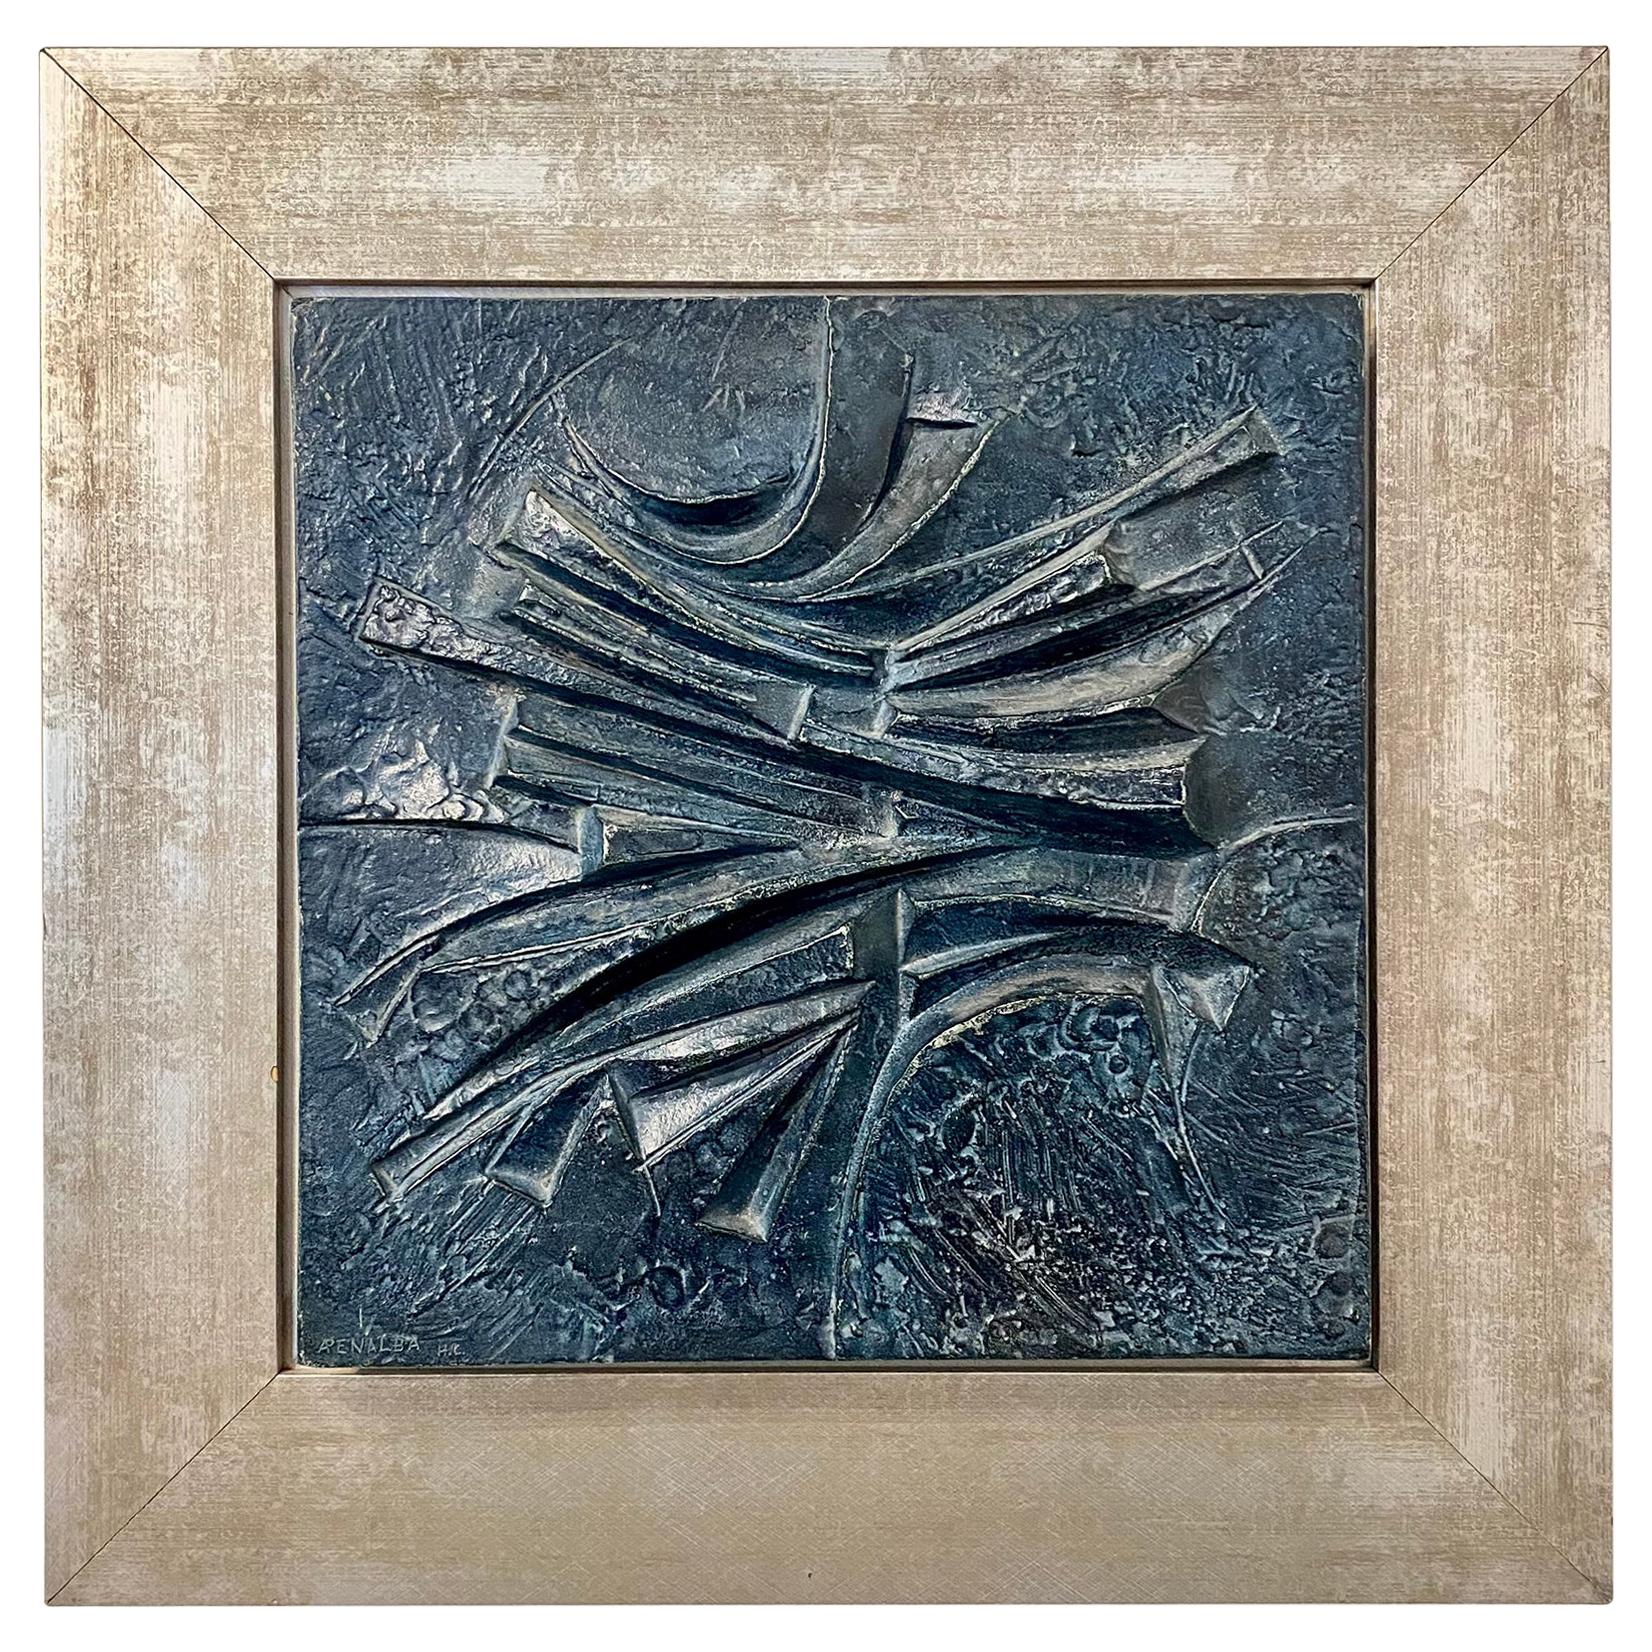 Stunning Bas Relief by Alicia Penalba in Metal Alloy